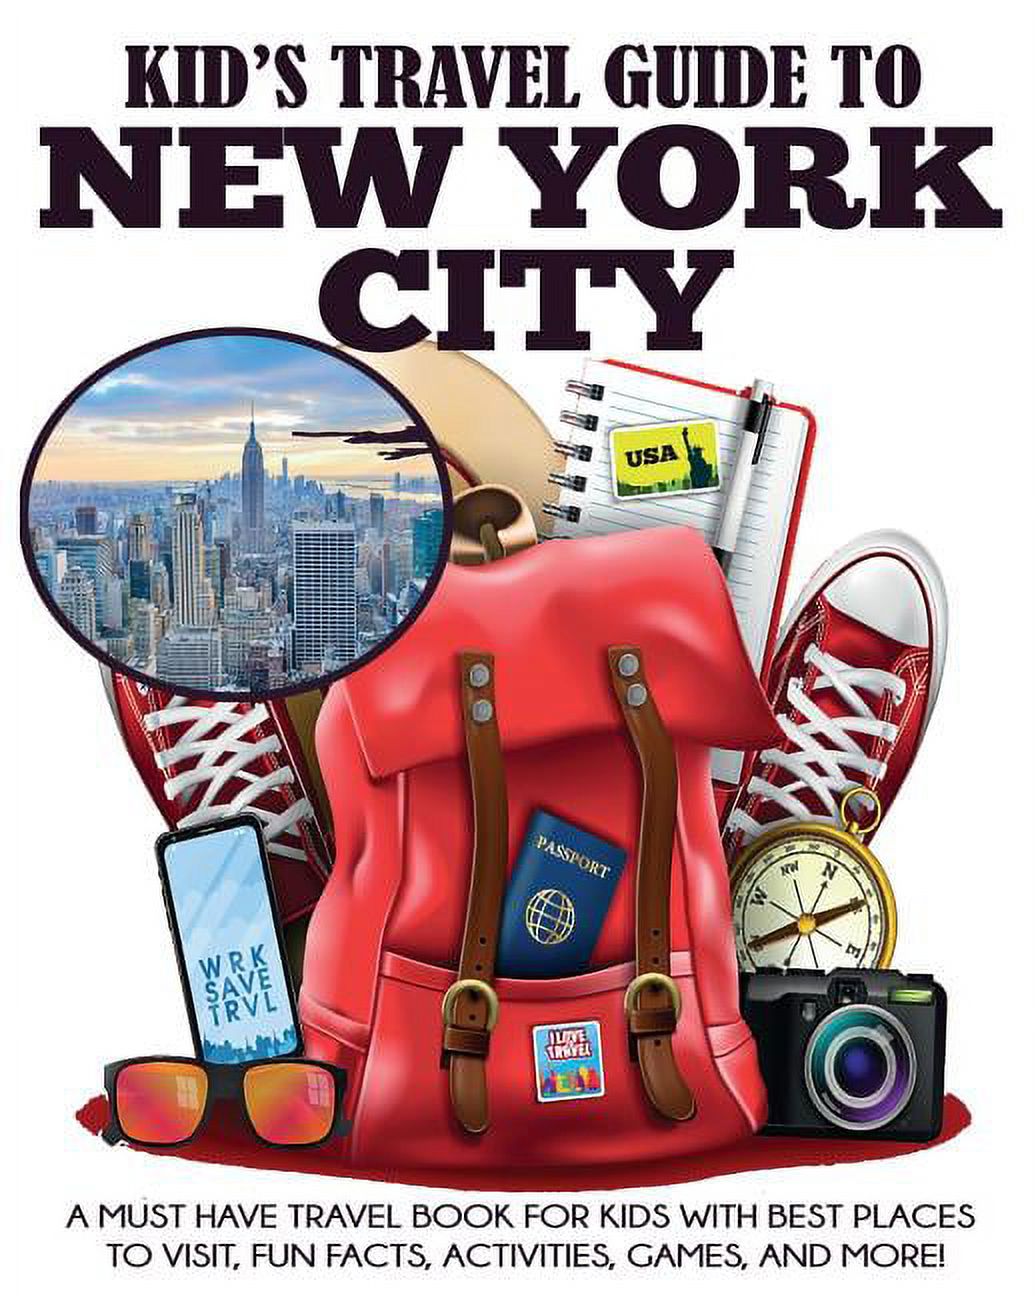 Kids' Travel Books: Kid's Travel Guide to New York City: A Must